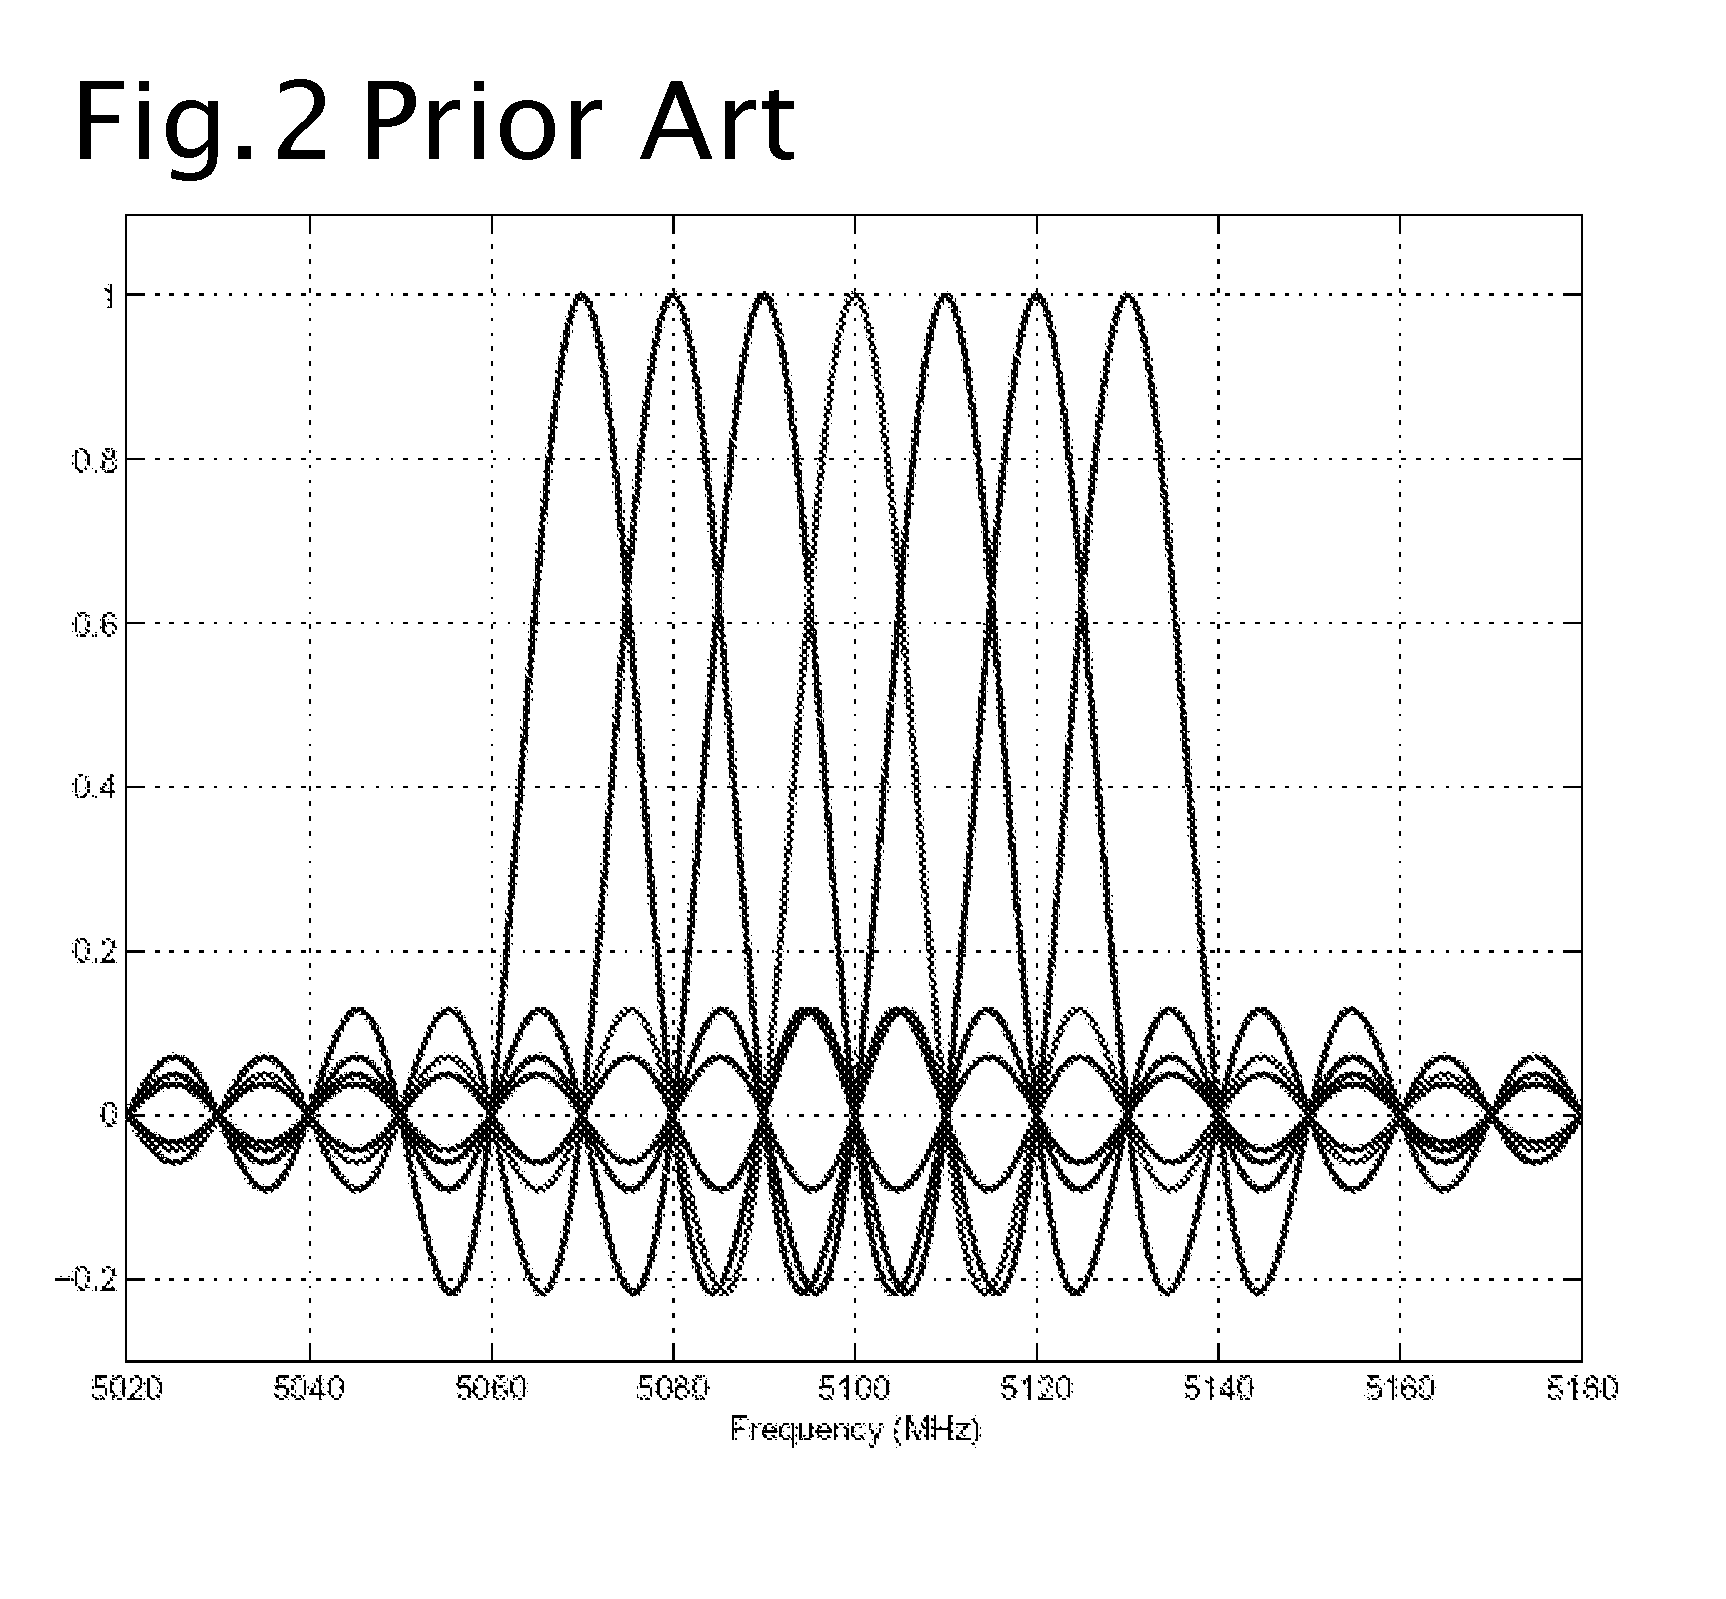 Cognitive Ultrawideband-Orthogonal Frequency Division Multiplexing